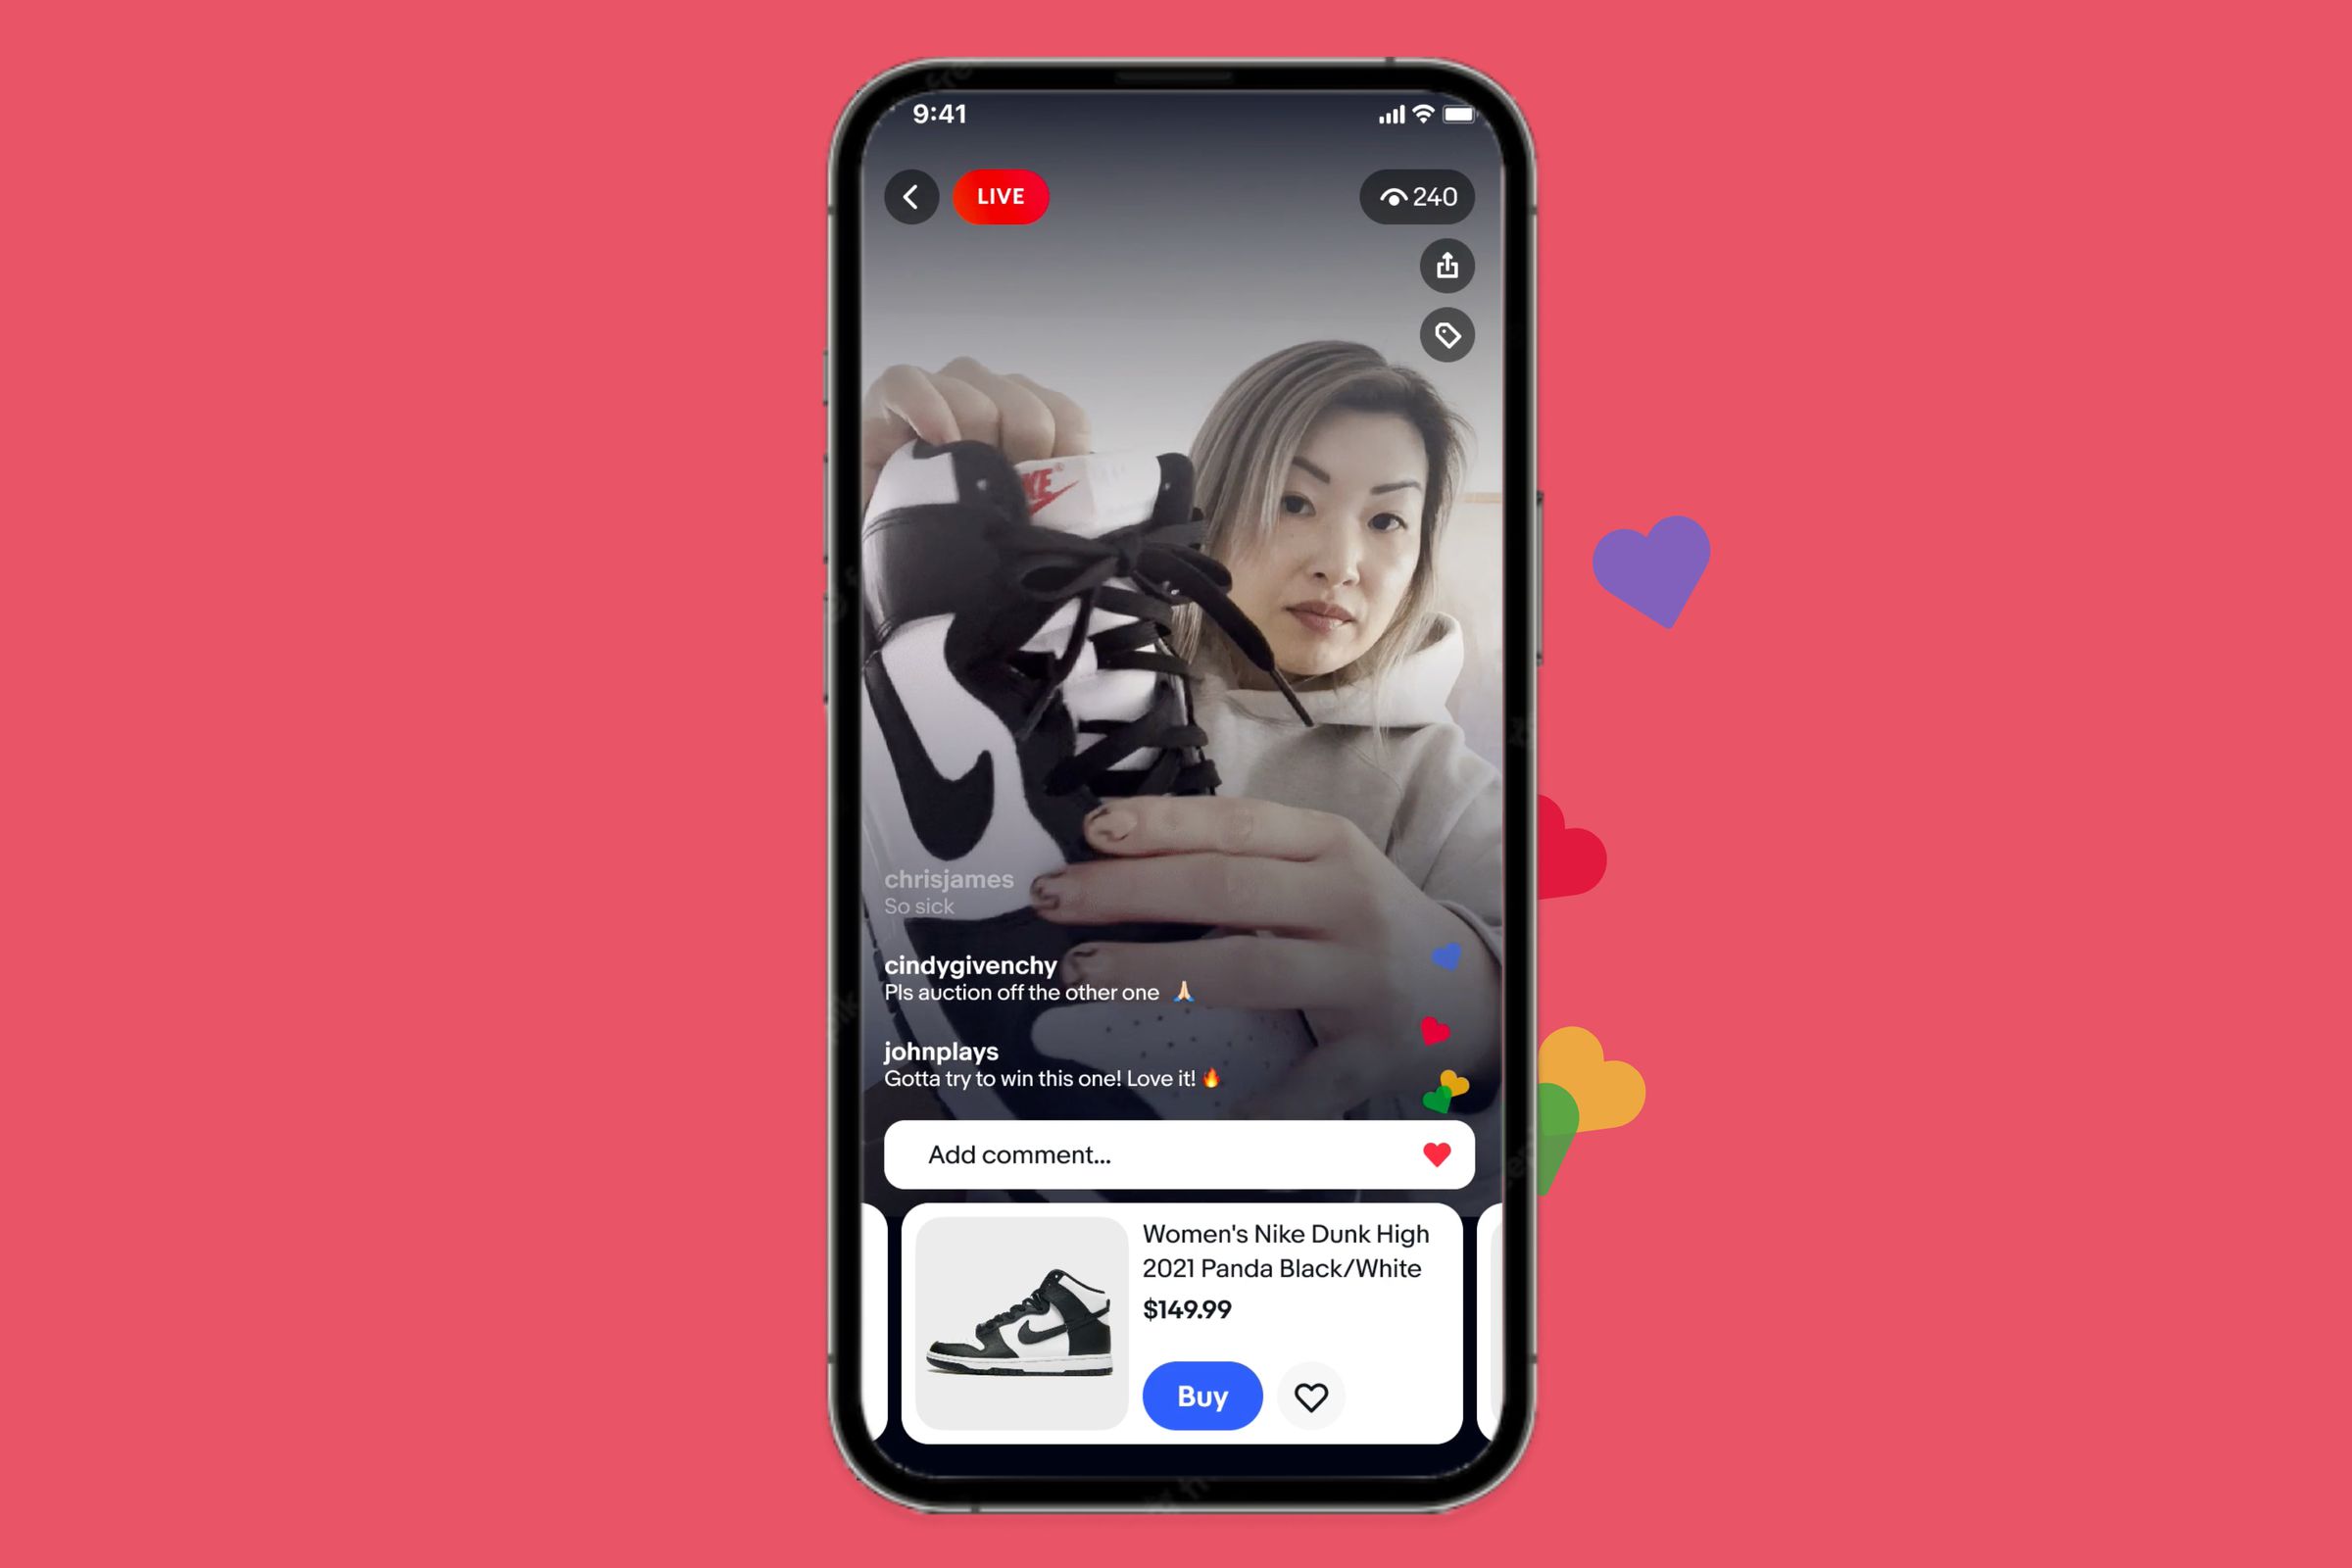 eBay Live looks heavily inspired by Instagram’s livestream feature.